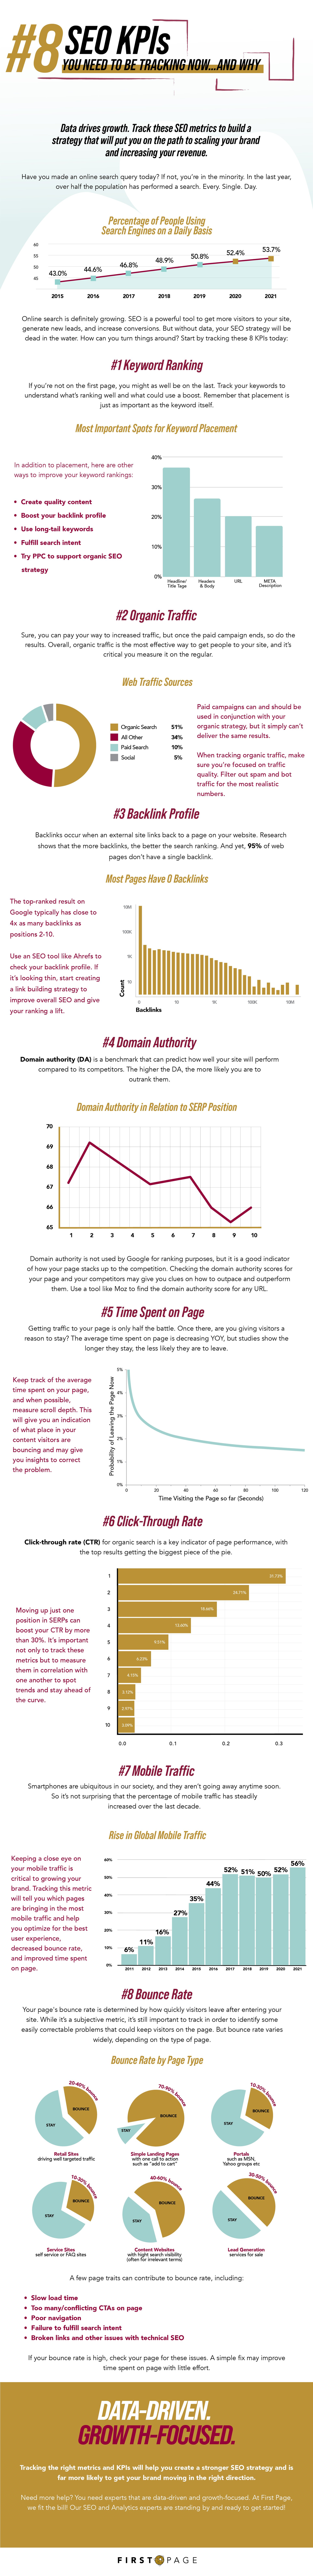 8 SEO KPIs to Measure & Track and Why [INFOGRAPHIC]